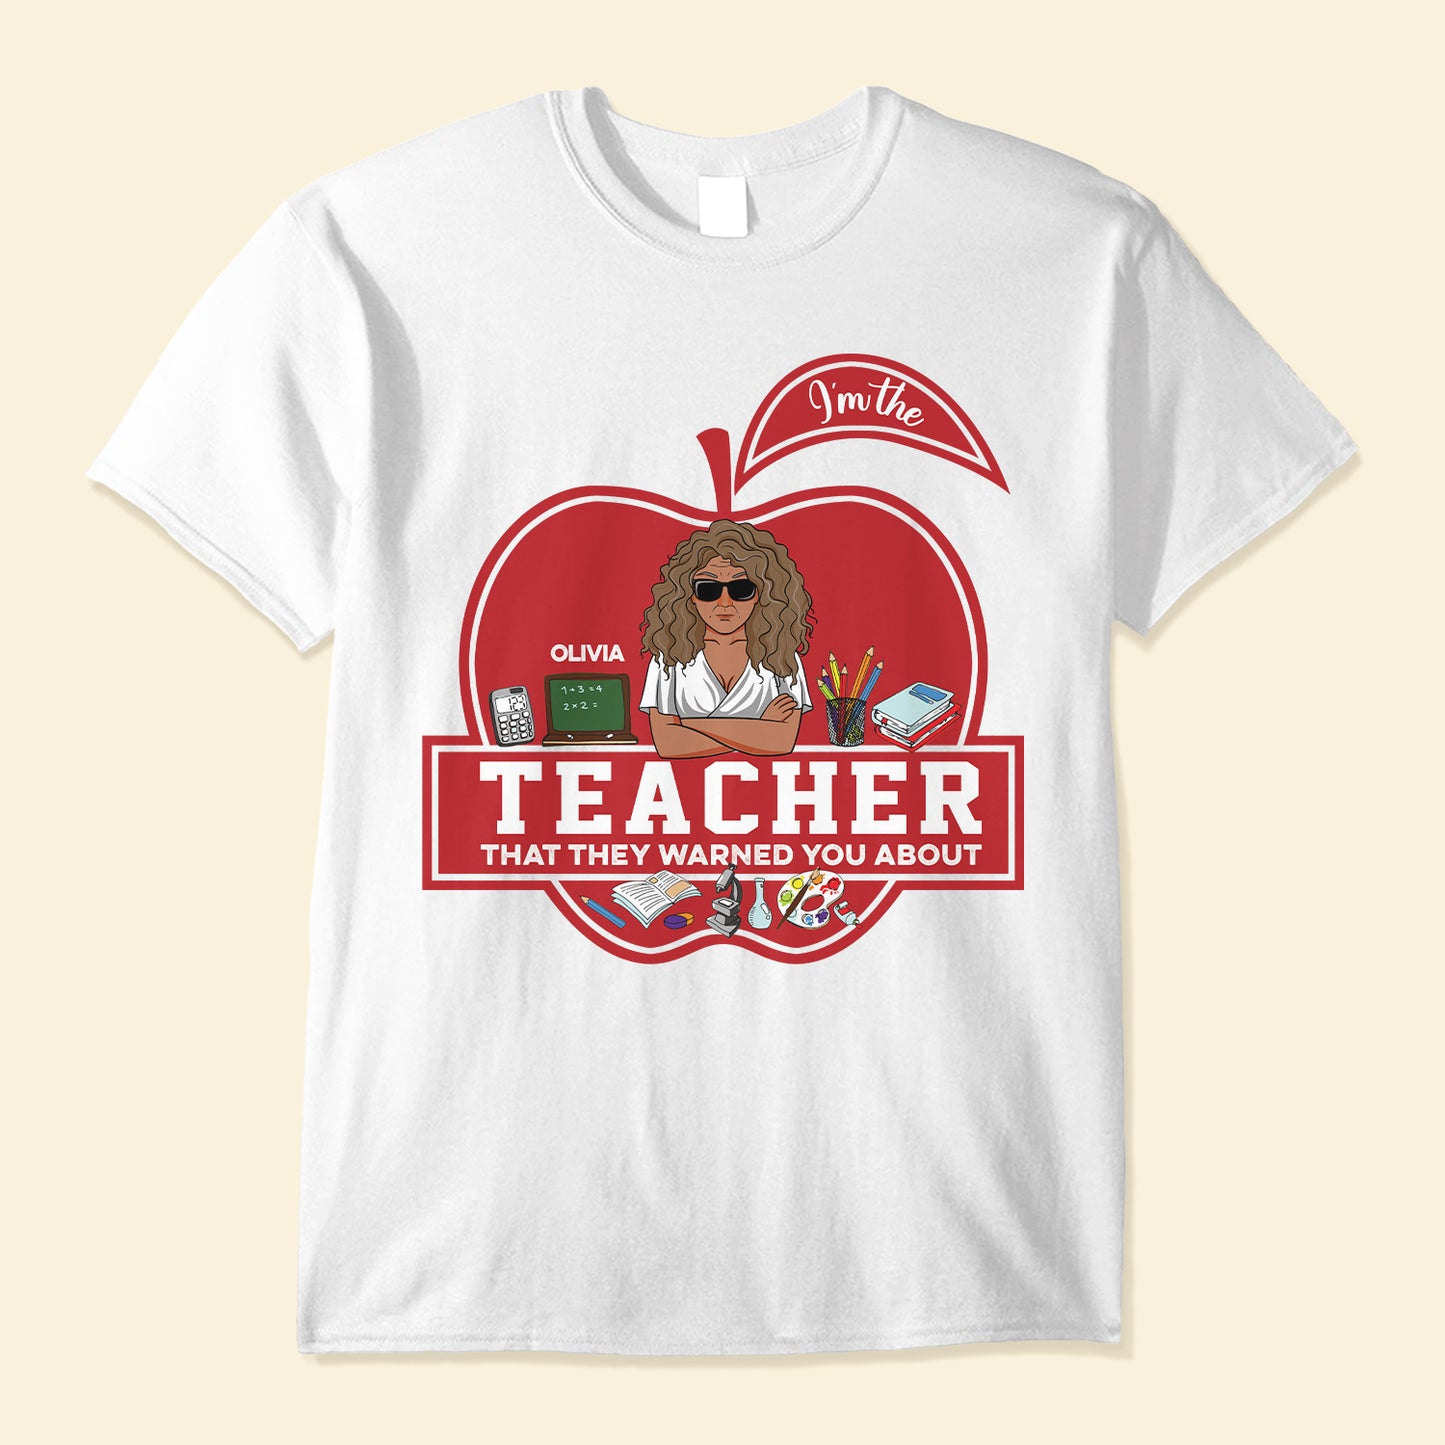 I'm The Teacher That They Warned You About - Personalized Shirt - Back To School, First Day Of School, Funny Gift For Teachers, Teacher Assistants